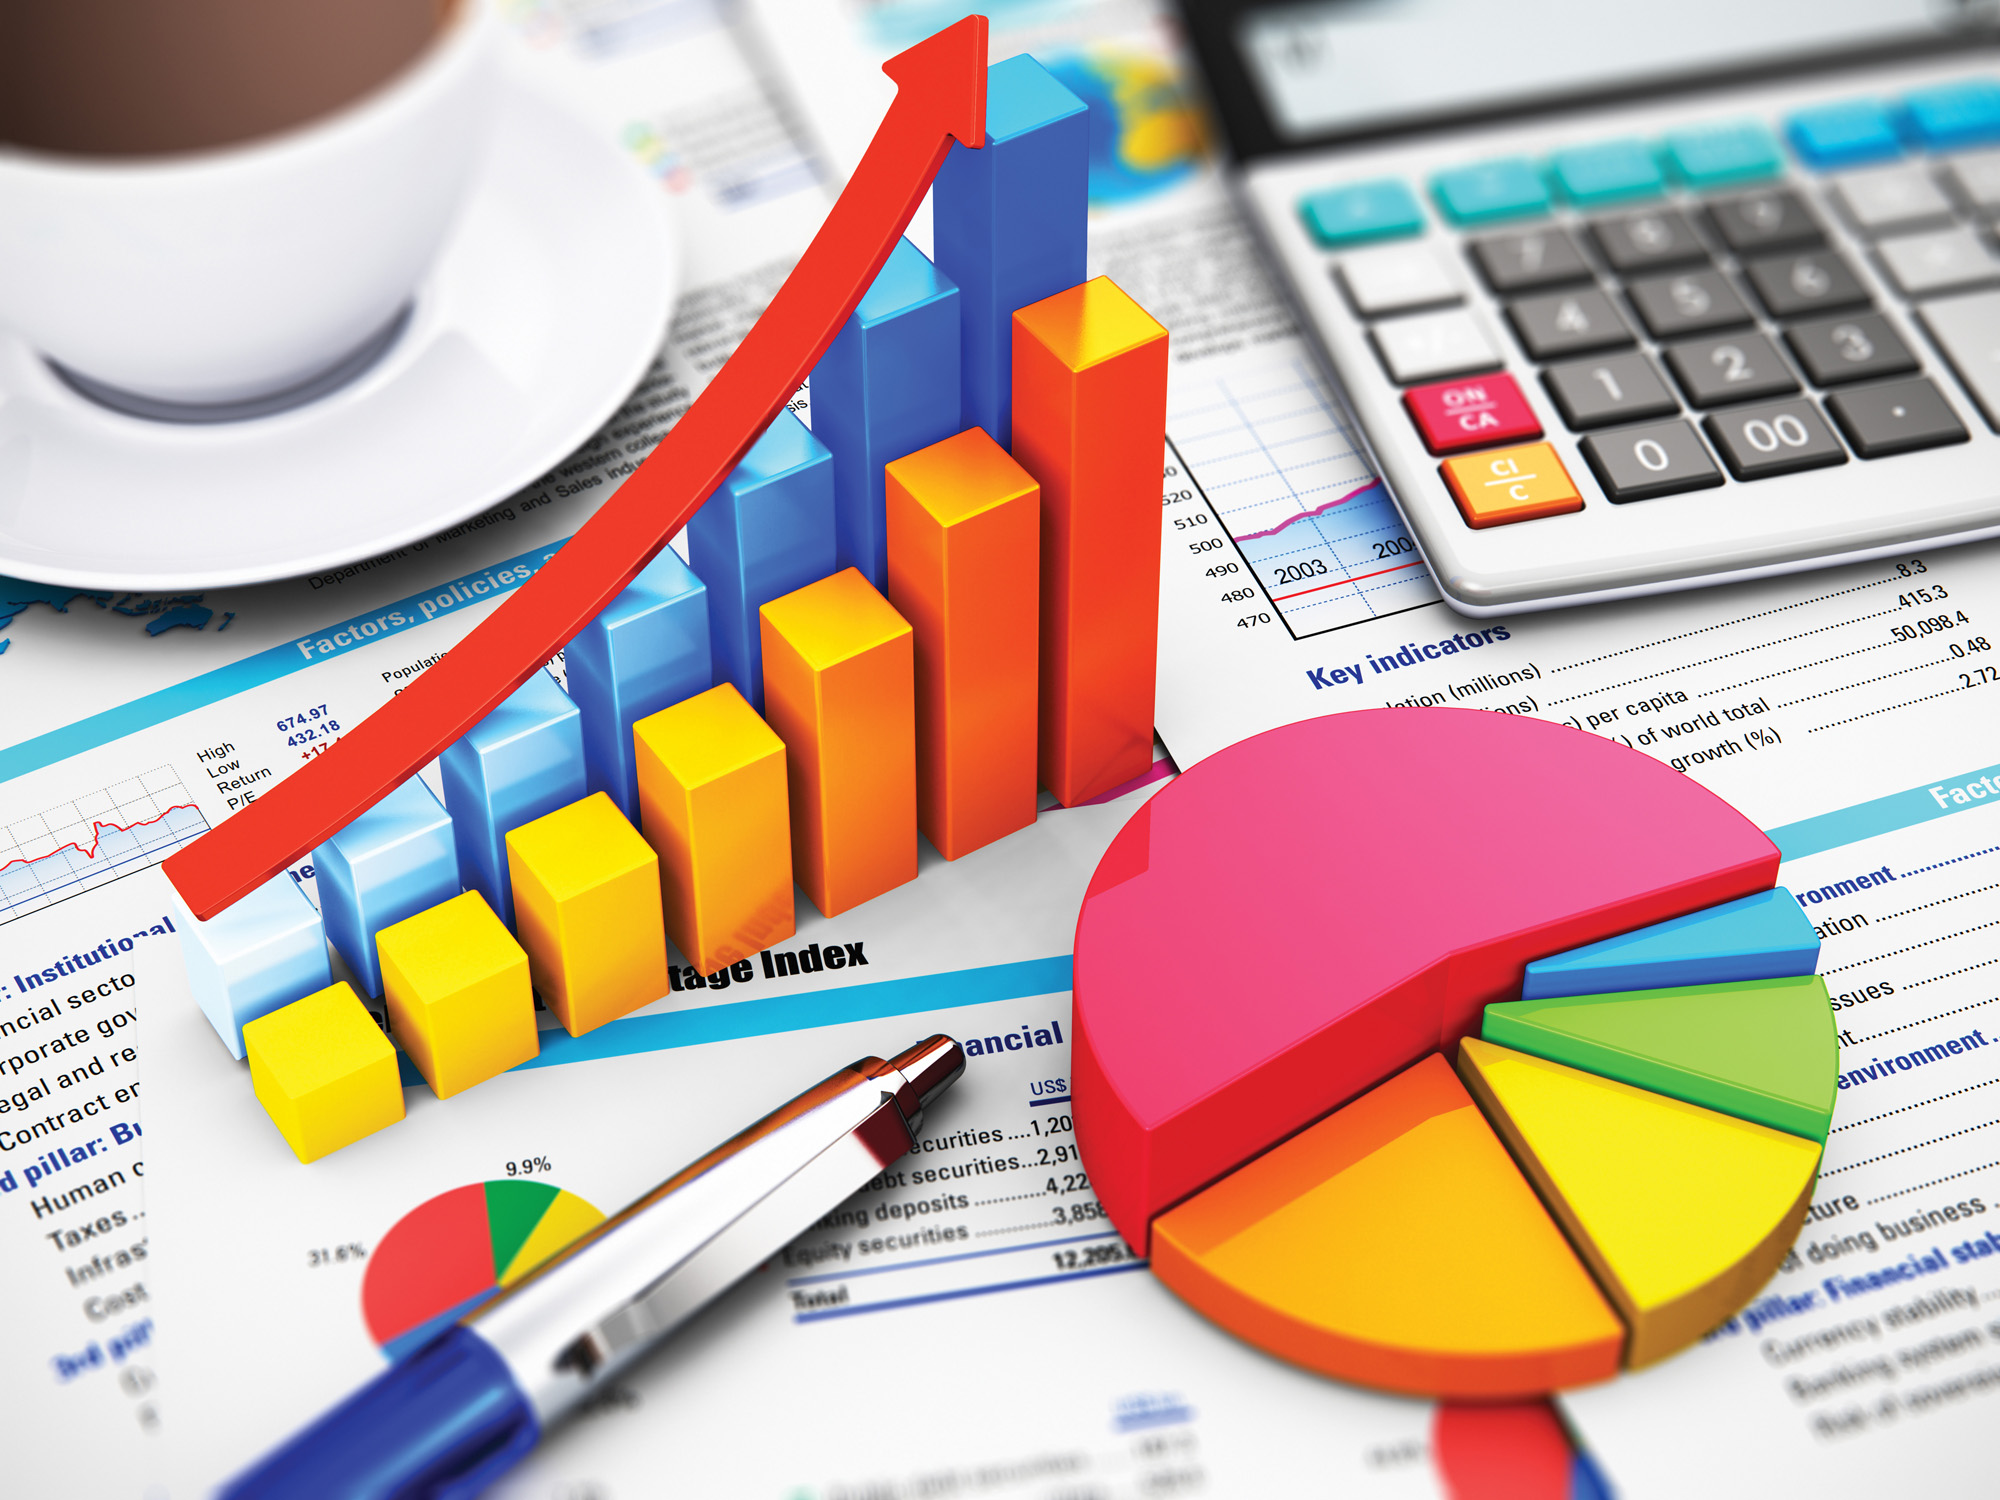 A colorful montage of financial reports, on top of which are positioned: a calculator, pie chart with multicolored slices, pen, double bar chart, and a cup of coffee.